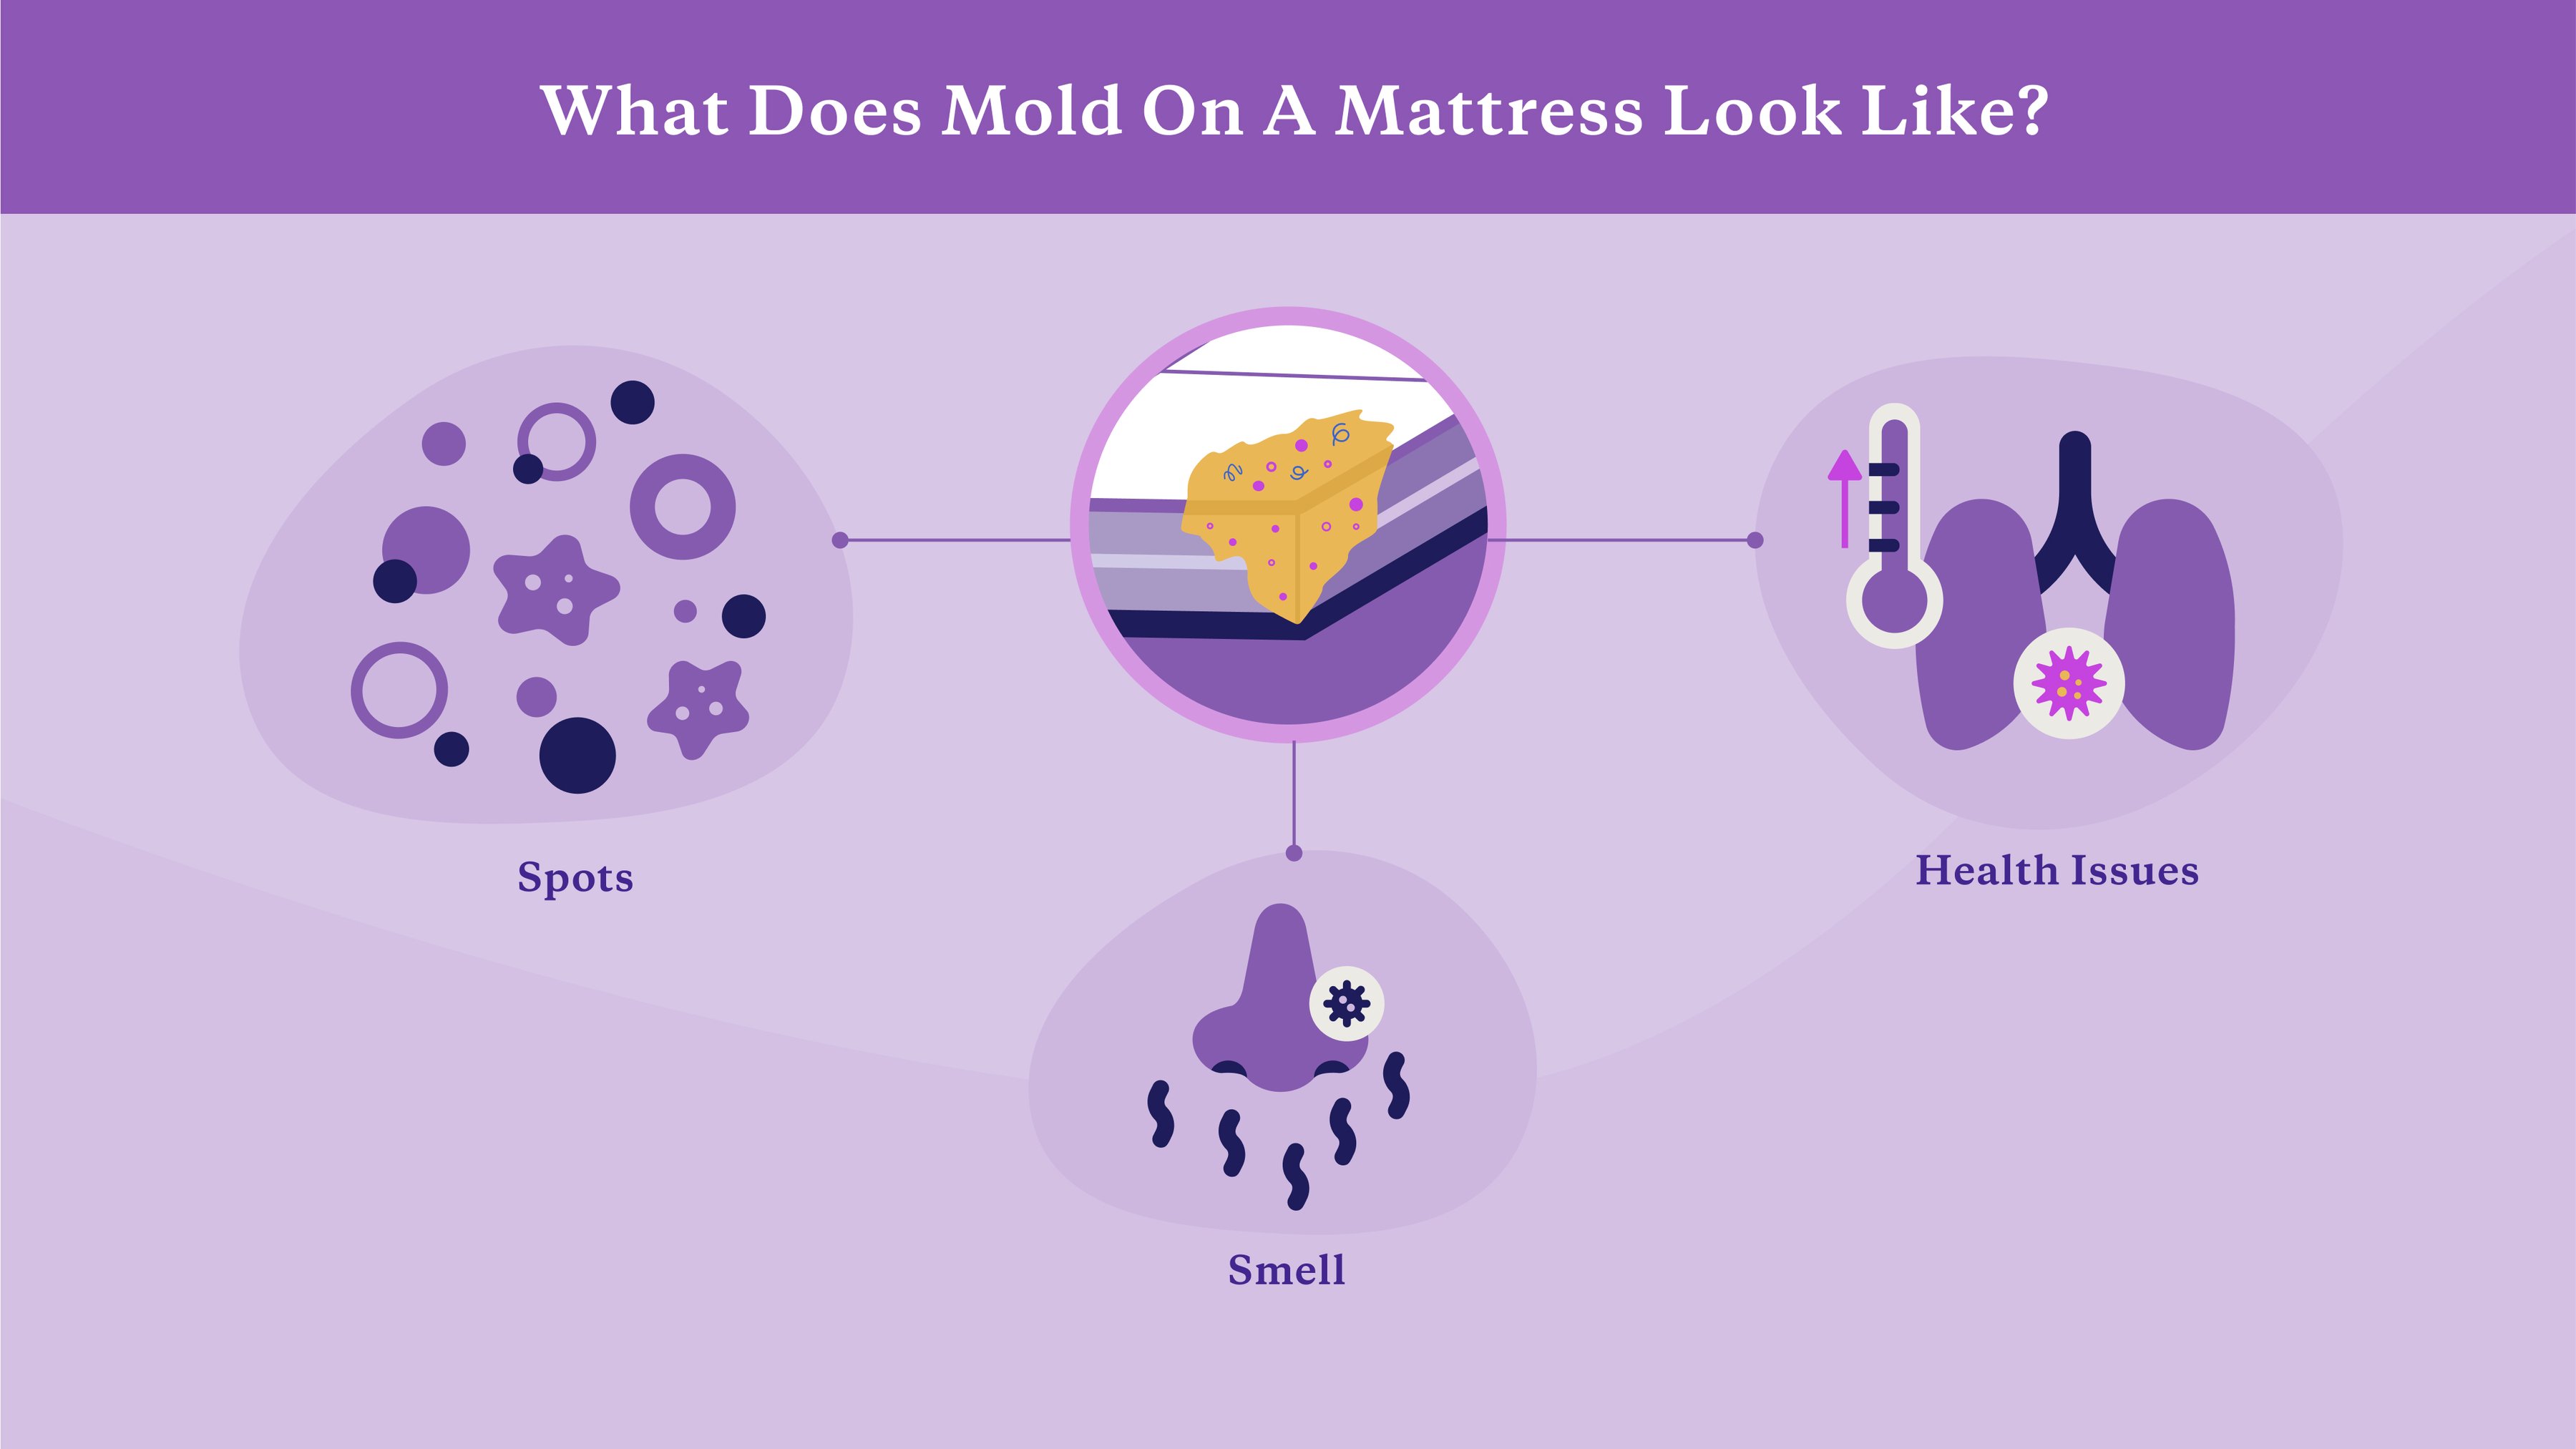 What mold on a mattress looks like